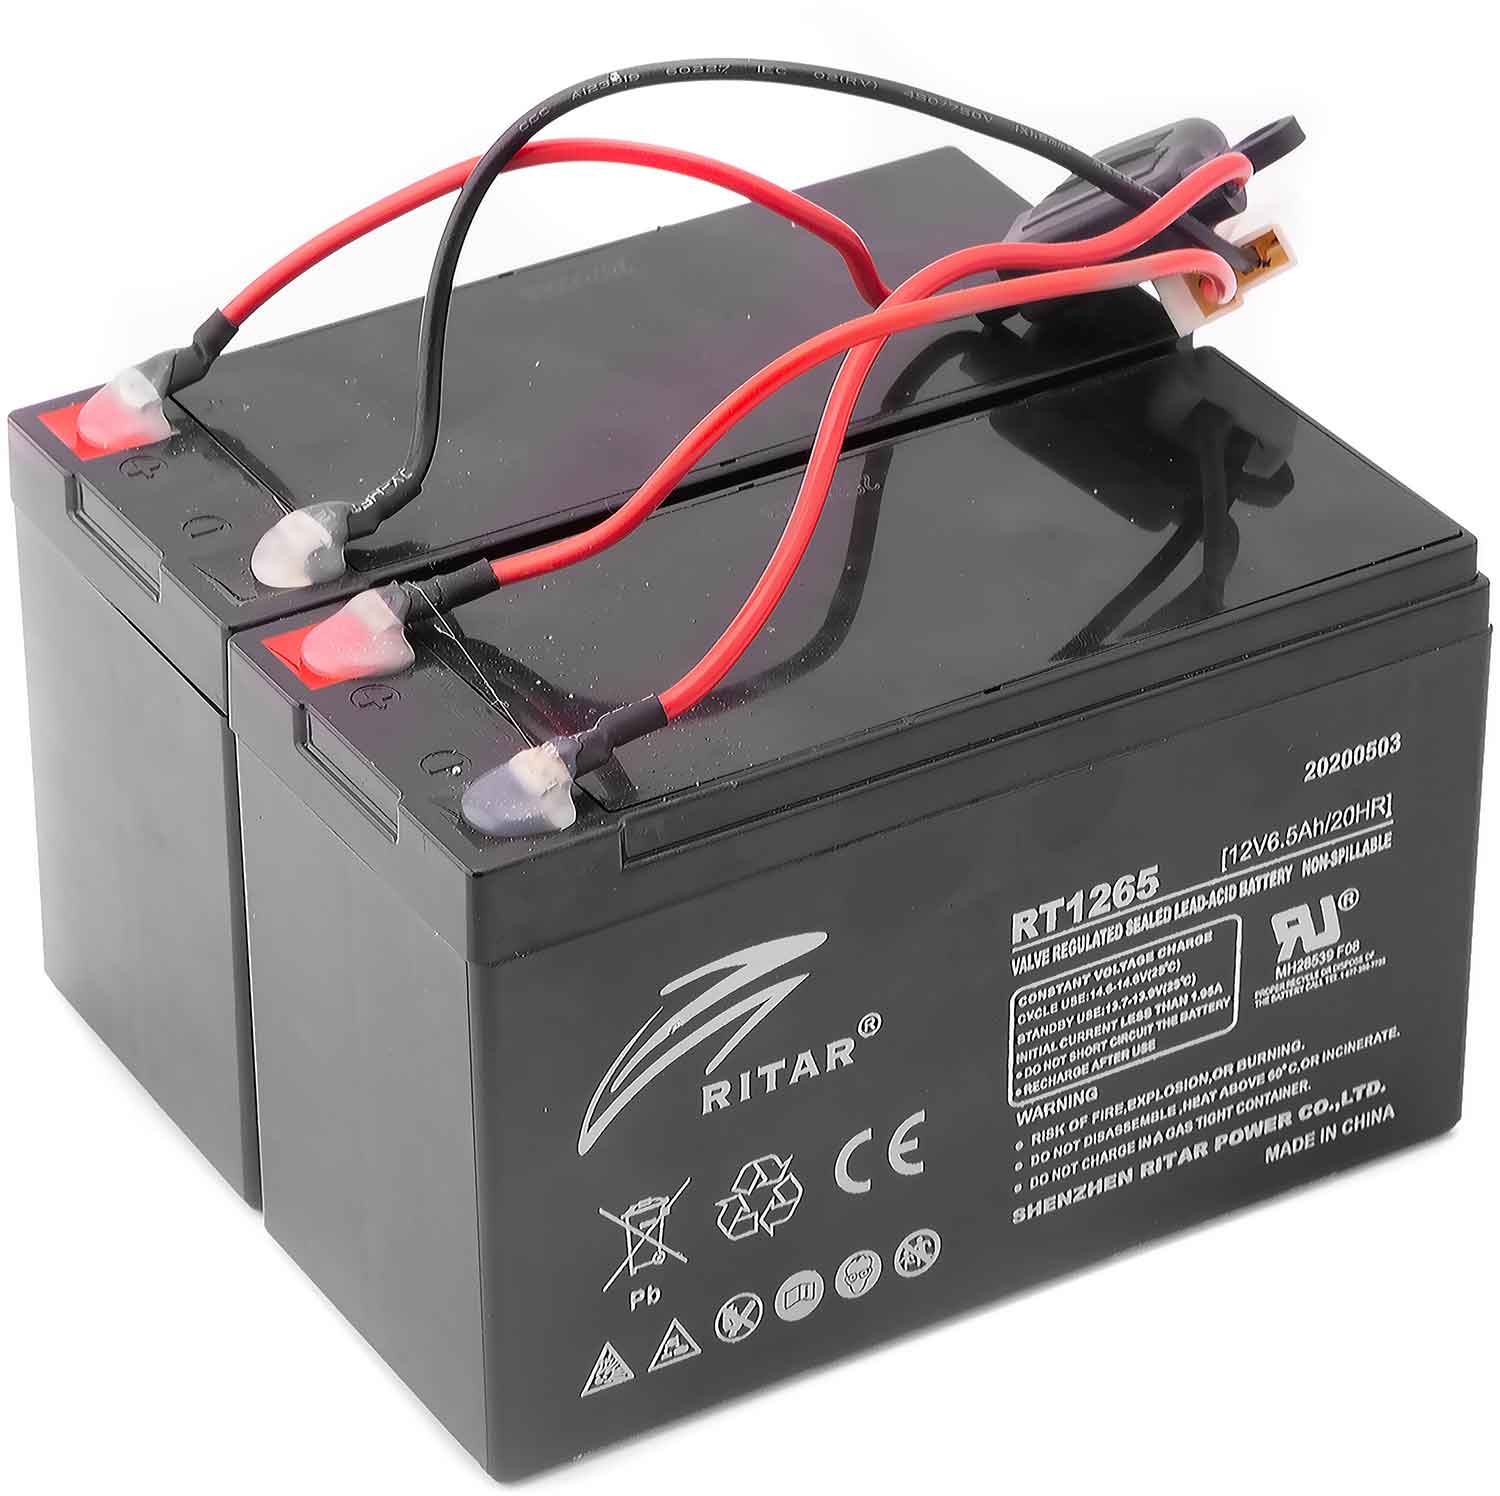 Lead battery 24V 6,5 Ah (SET) SCOTEX by SXT - the onlineshop for emobility,  accessories and spare parts